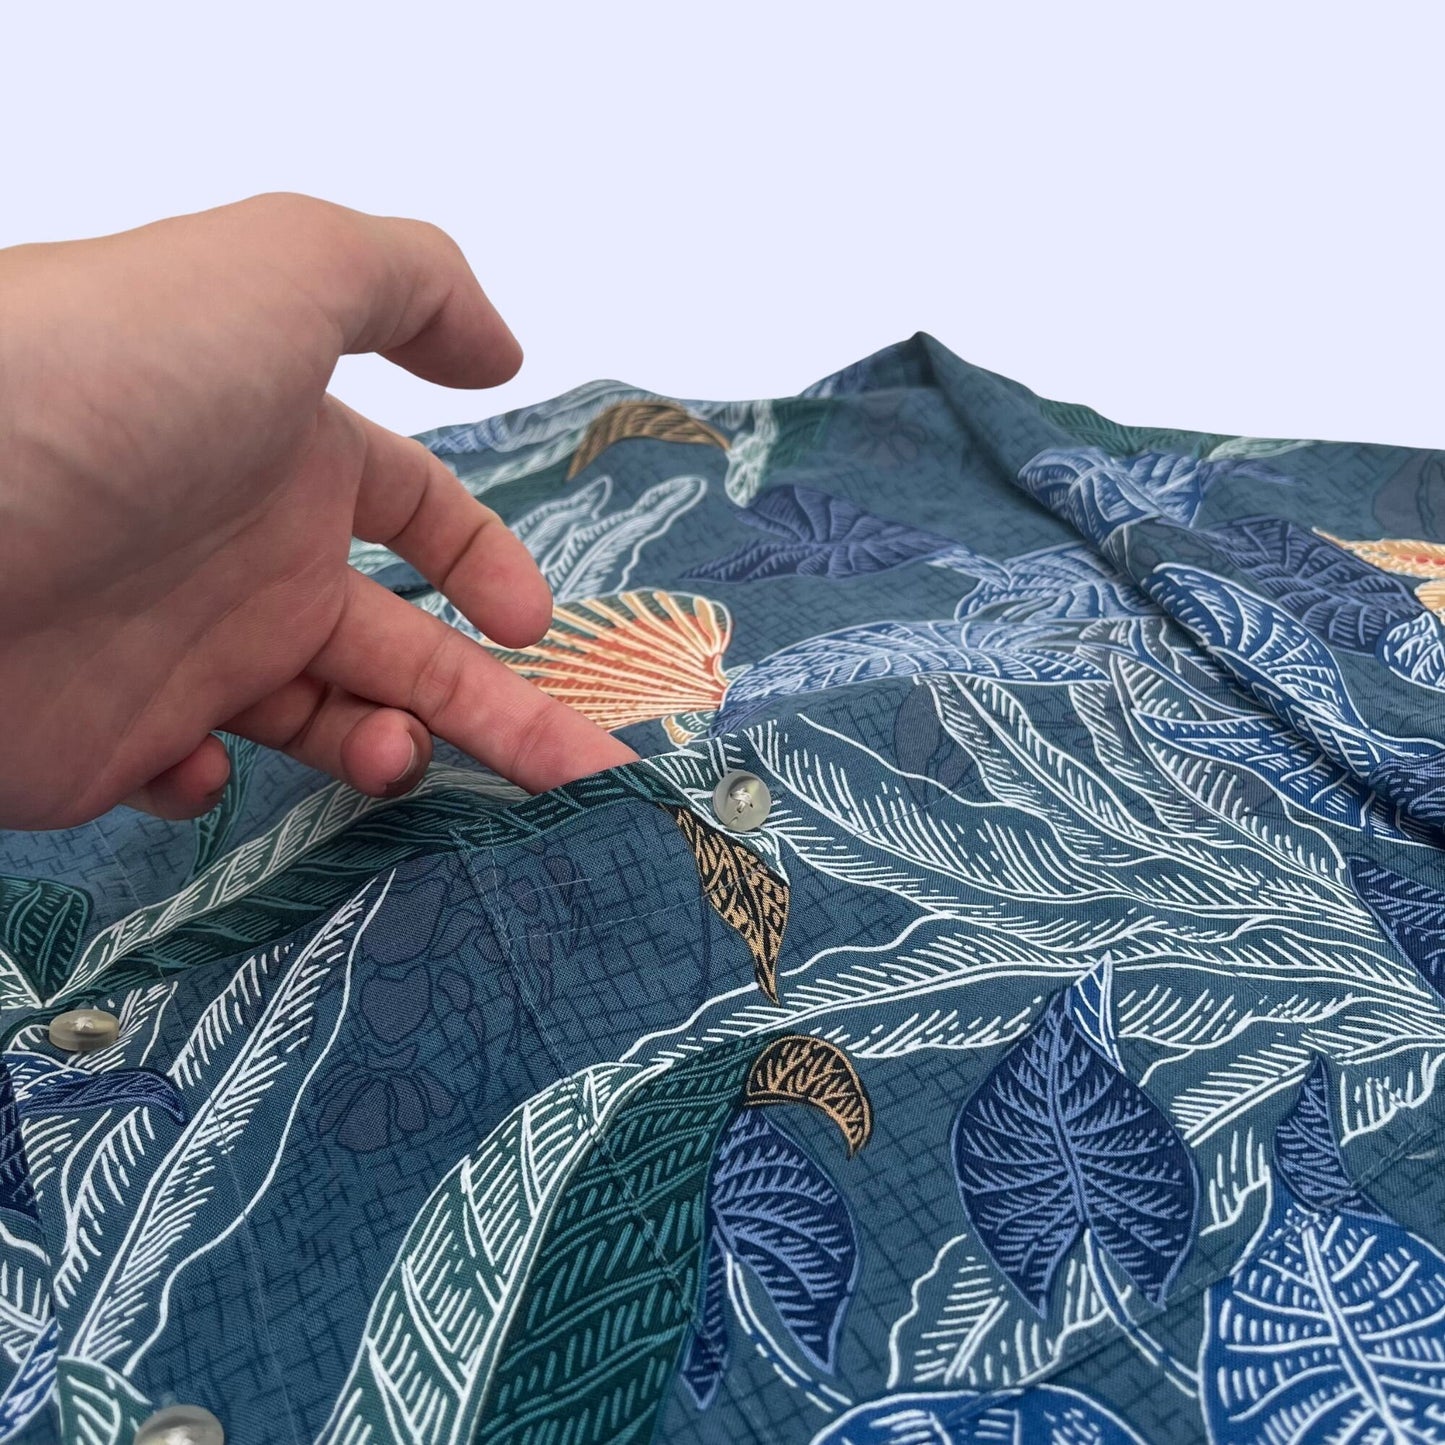 Vintage XL men's 90s button down by Campia Moda, leaf patterned men's hawaiian short sleeve shirt, 1990s blue and green men's top